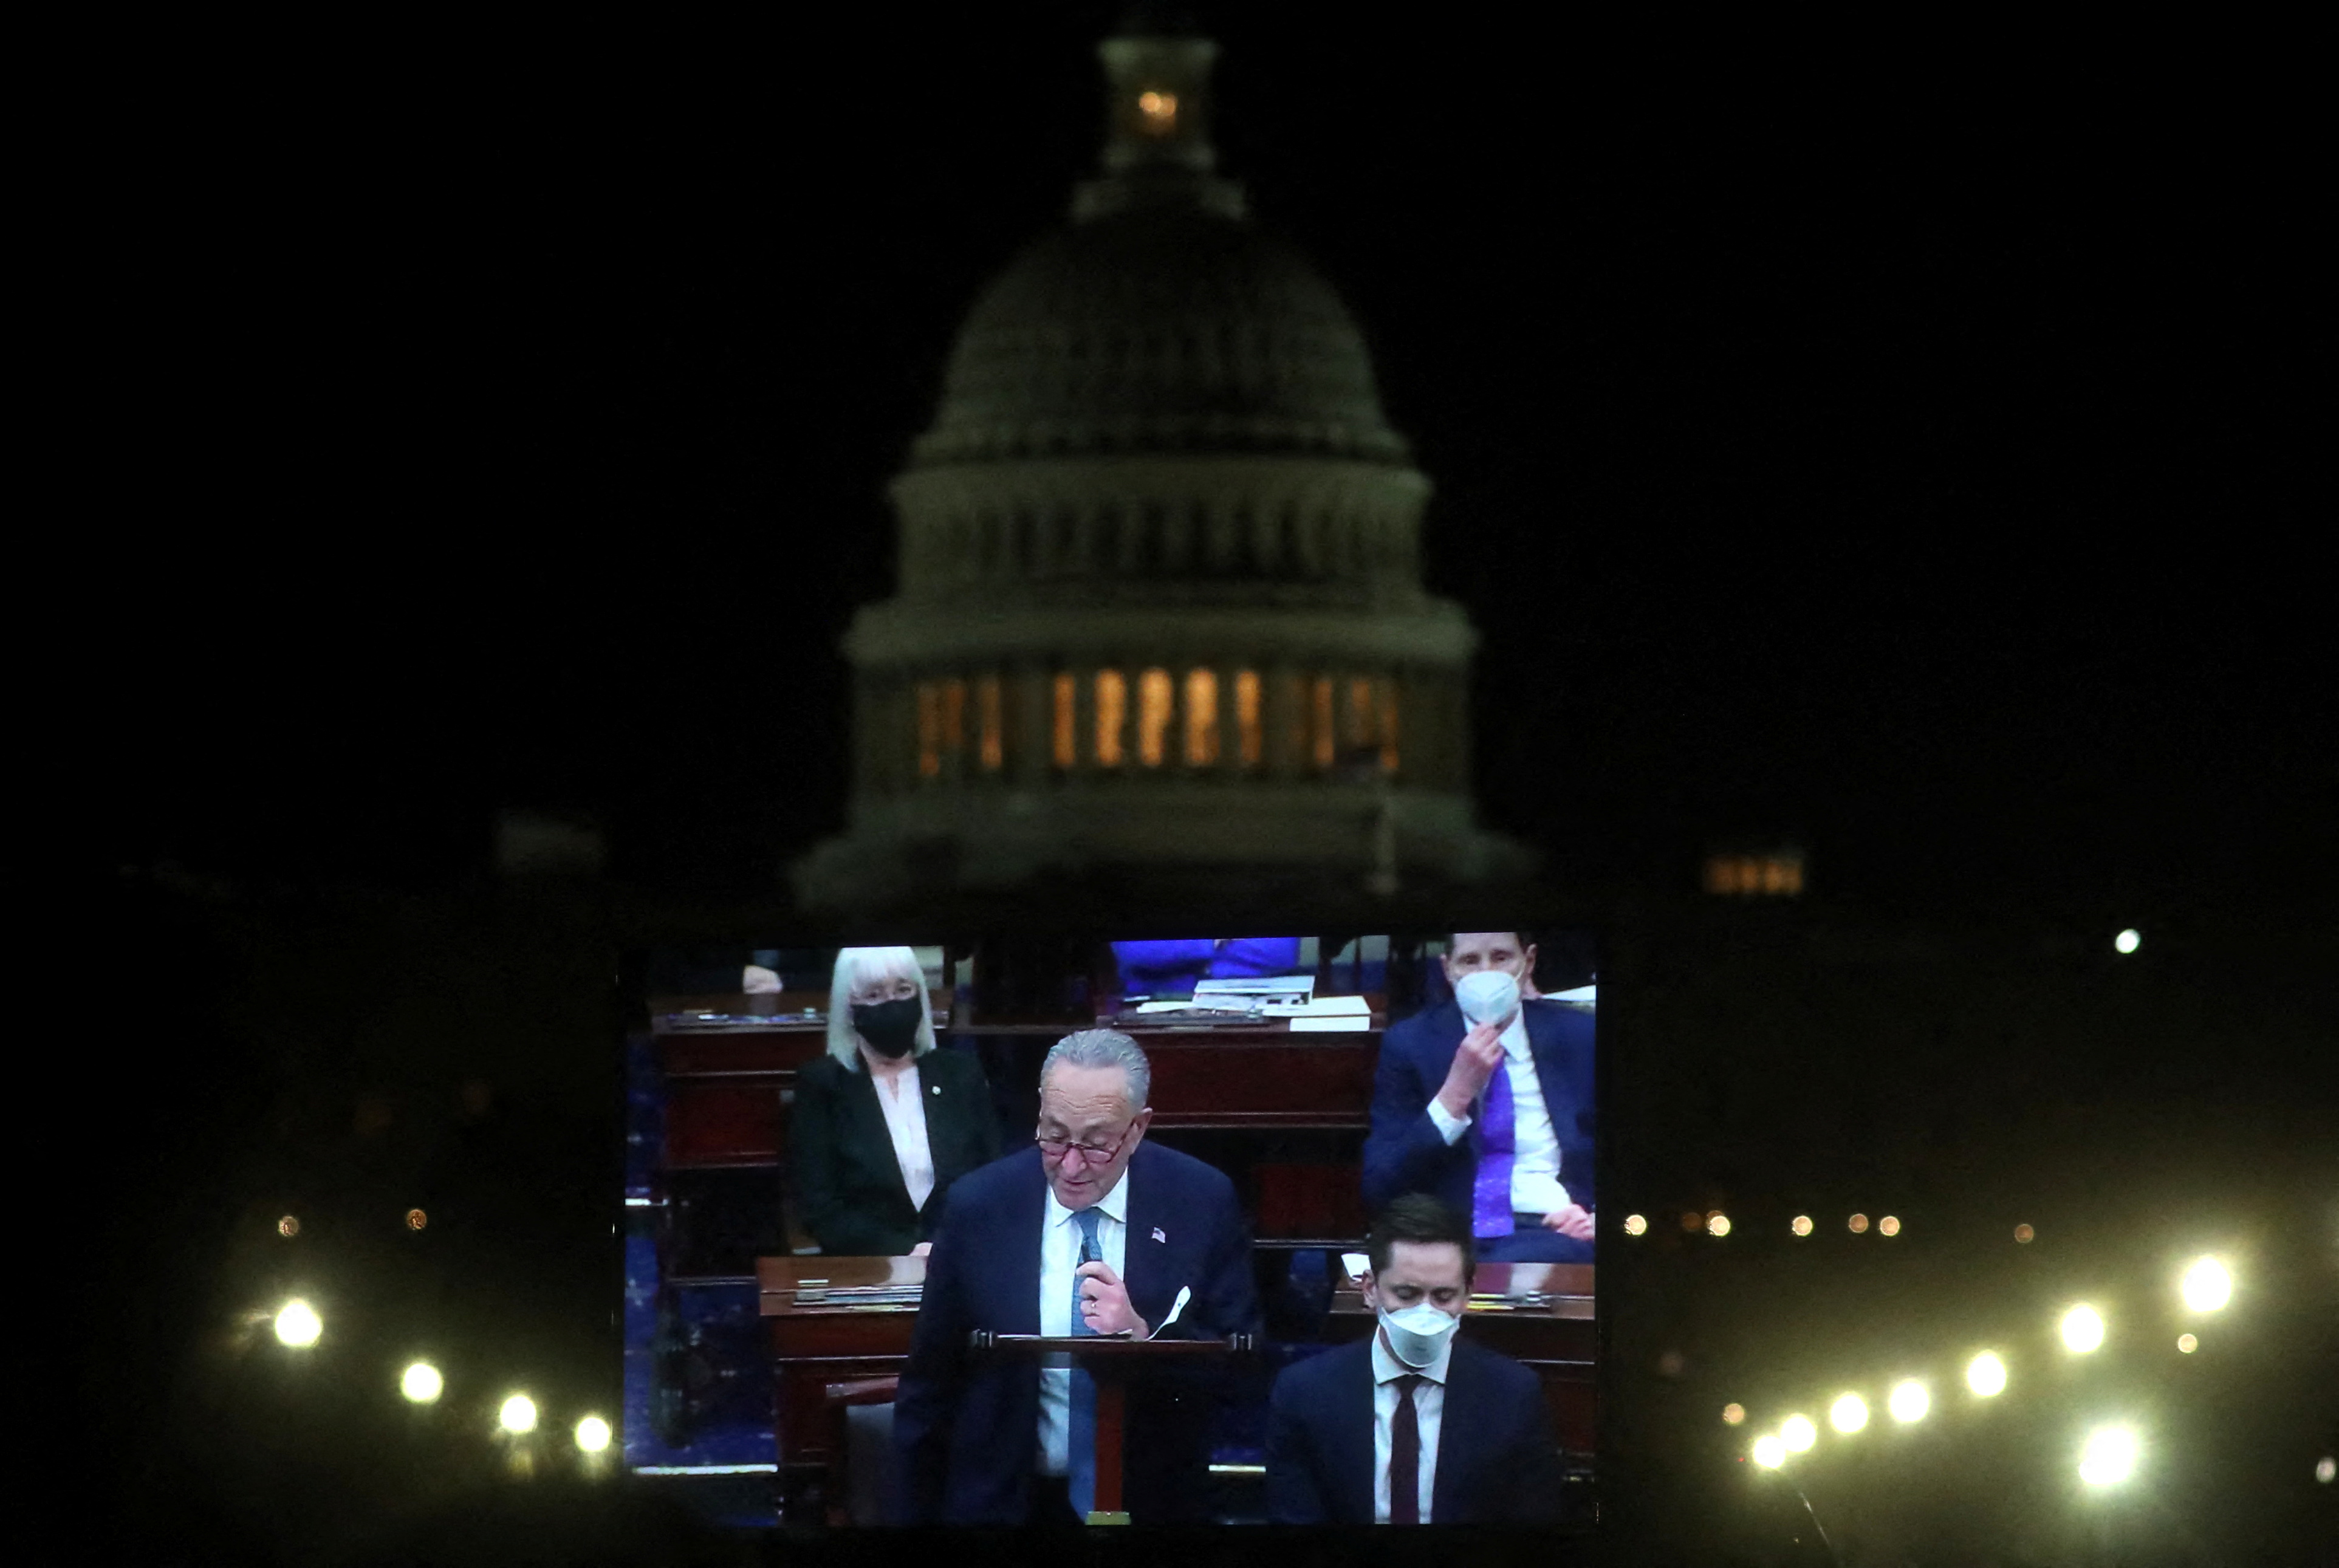 U.S. Senate Majority Leader Chuck Schumer (D-NY) is projected live on a screen as he takes part in the debate from U.S. Senators of voting rights legislation near the U.S. Capitol building in Washington, U.S., January 19, 2022. REUTERS/Leah Millis